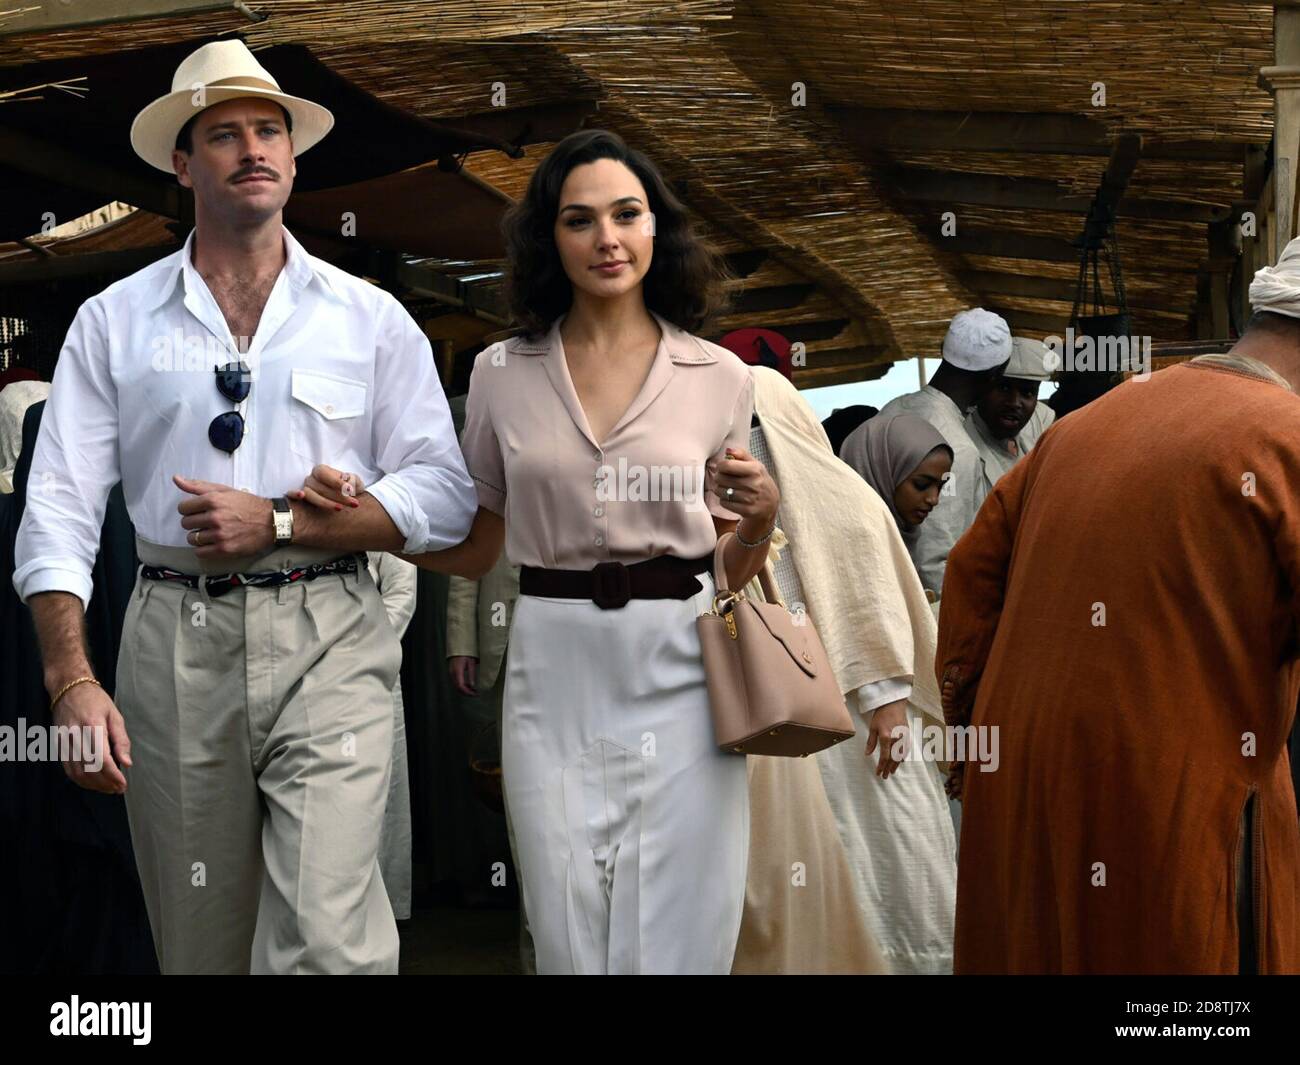 Death on the Nile is an upcoming mystery thriller film directed by Kenneth Branagh, with a screenplay by Michael Green, based on the 1937 novel of the same name by Agatha Christie. The film is a follow-up to 2017's Murder on the Orient Express and stars Branagh returning as Hercule Poirot, along with Tom Bateman (also returning from the first film), Annette Bening, Russell Brand, Ali Fazal, Dawn French, Gal Gadot, Armie Hammer, Rose Leslie, Emma Mackey, Sophie Okonedo, Jennifer Saunders, and Letitia Wright. The film is the third screen adaptation of Christie's novel, following the 1978 film an Stock Photo